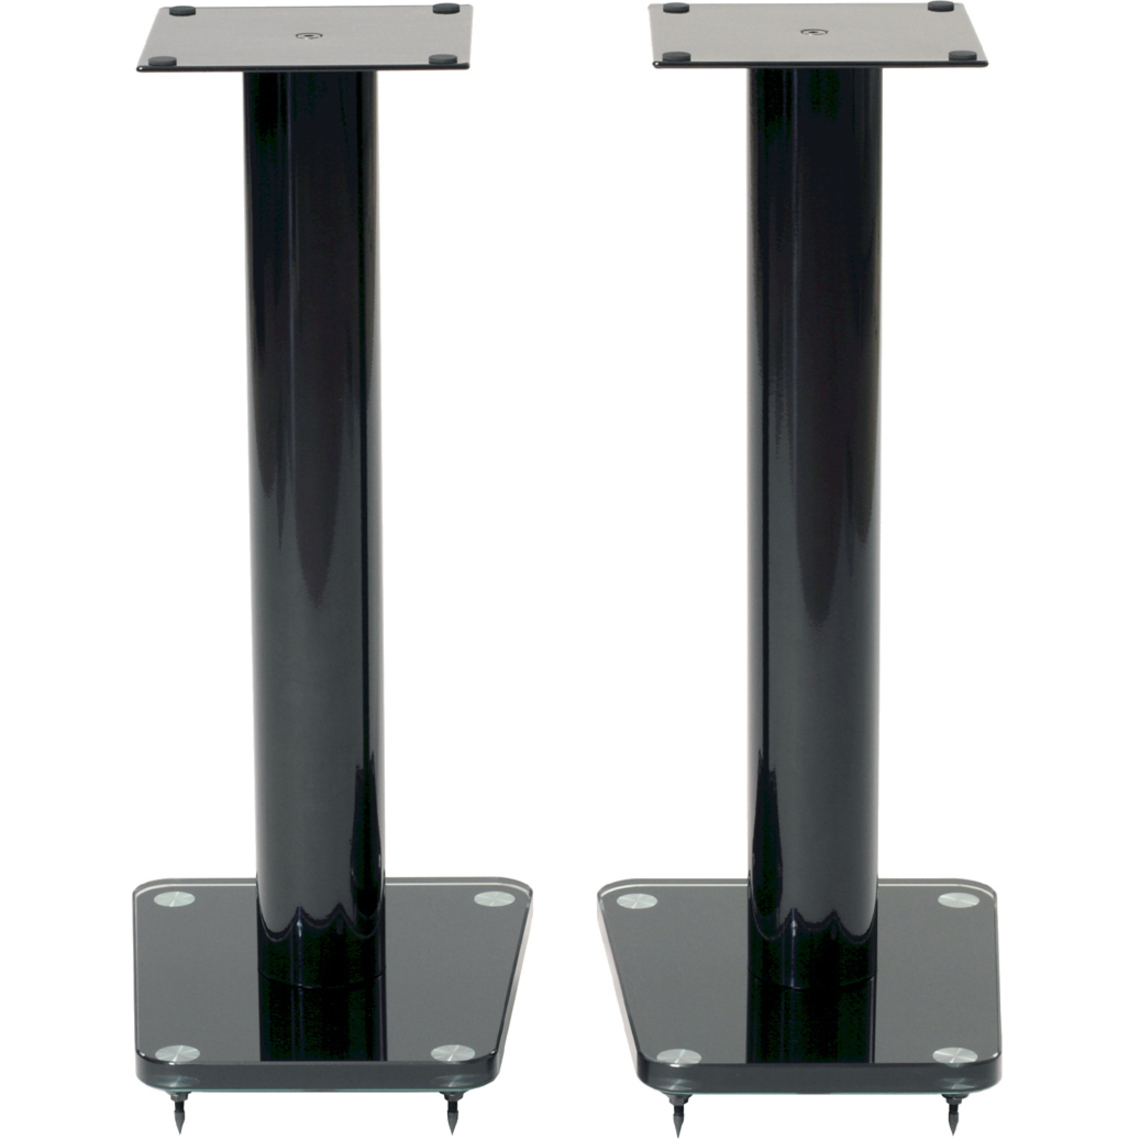 24" Tempered glass & metal speaker stand in gloss black finish. Sold as pair - image 2 of 3